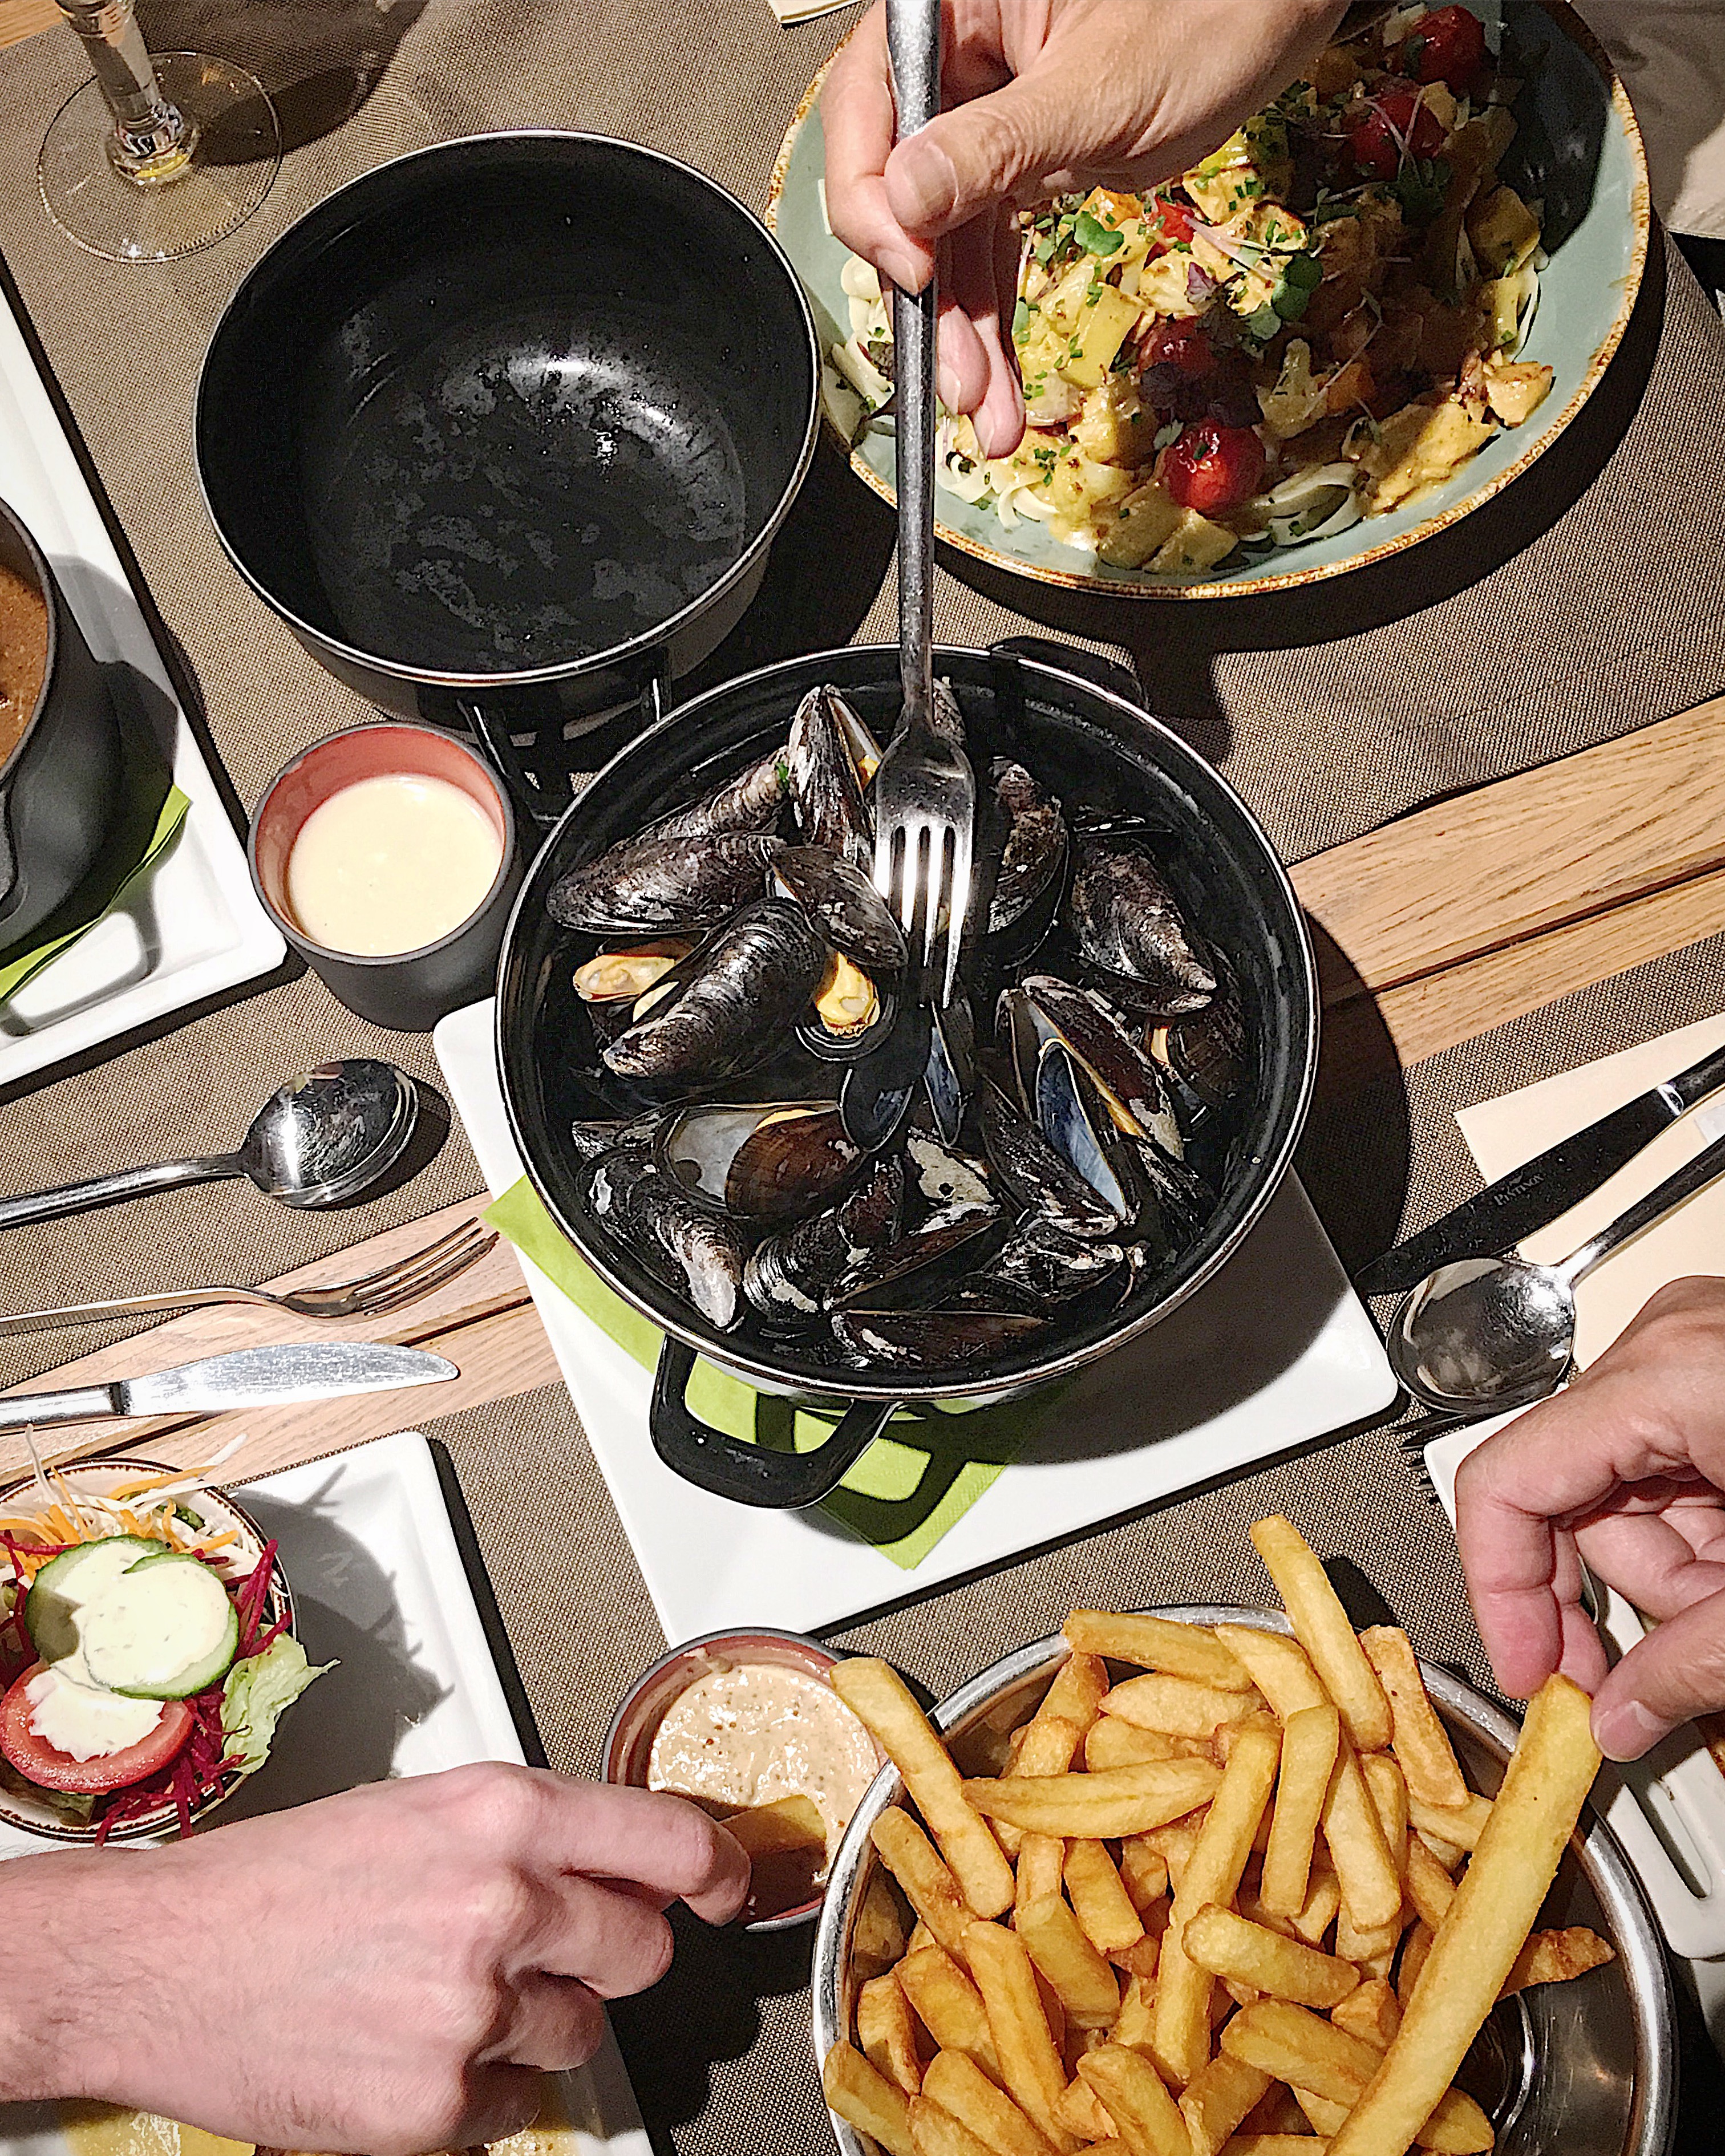 Mussels (moules frites) in Brussels